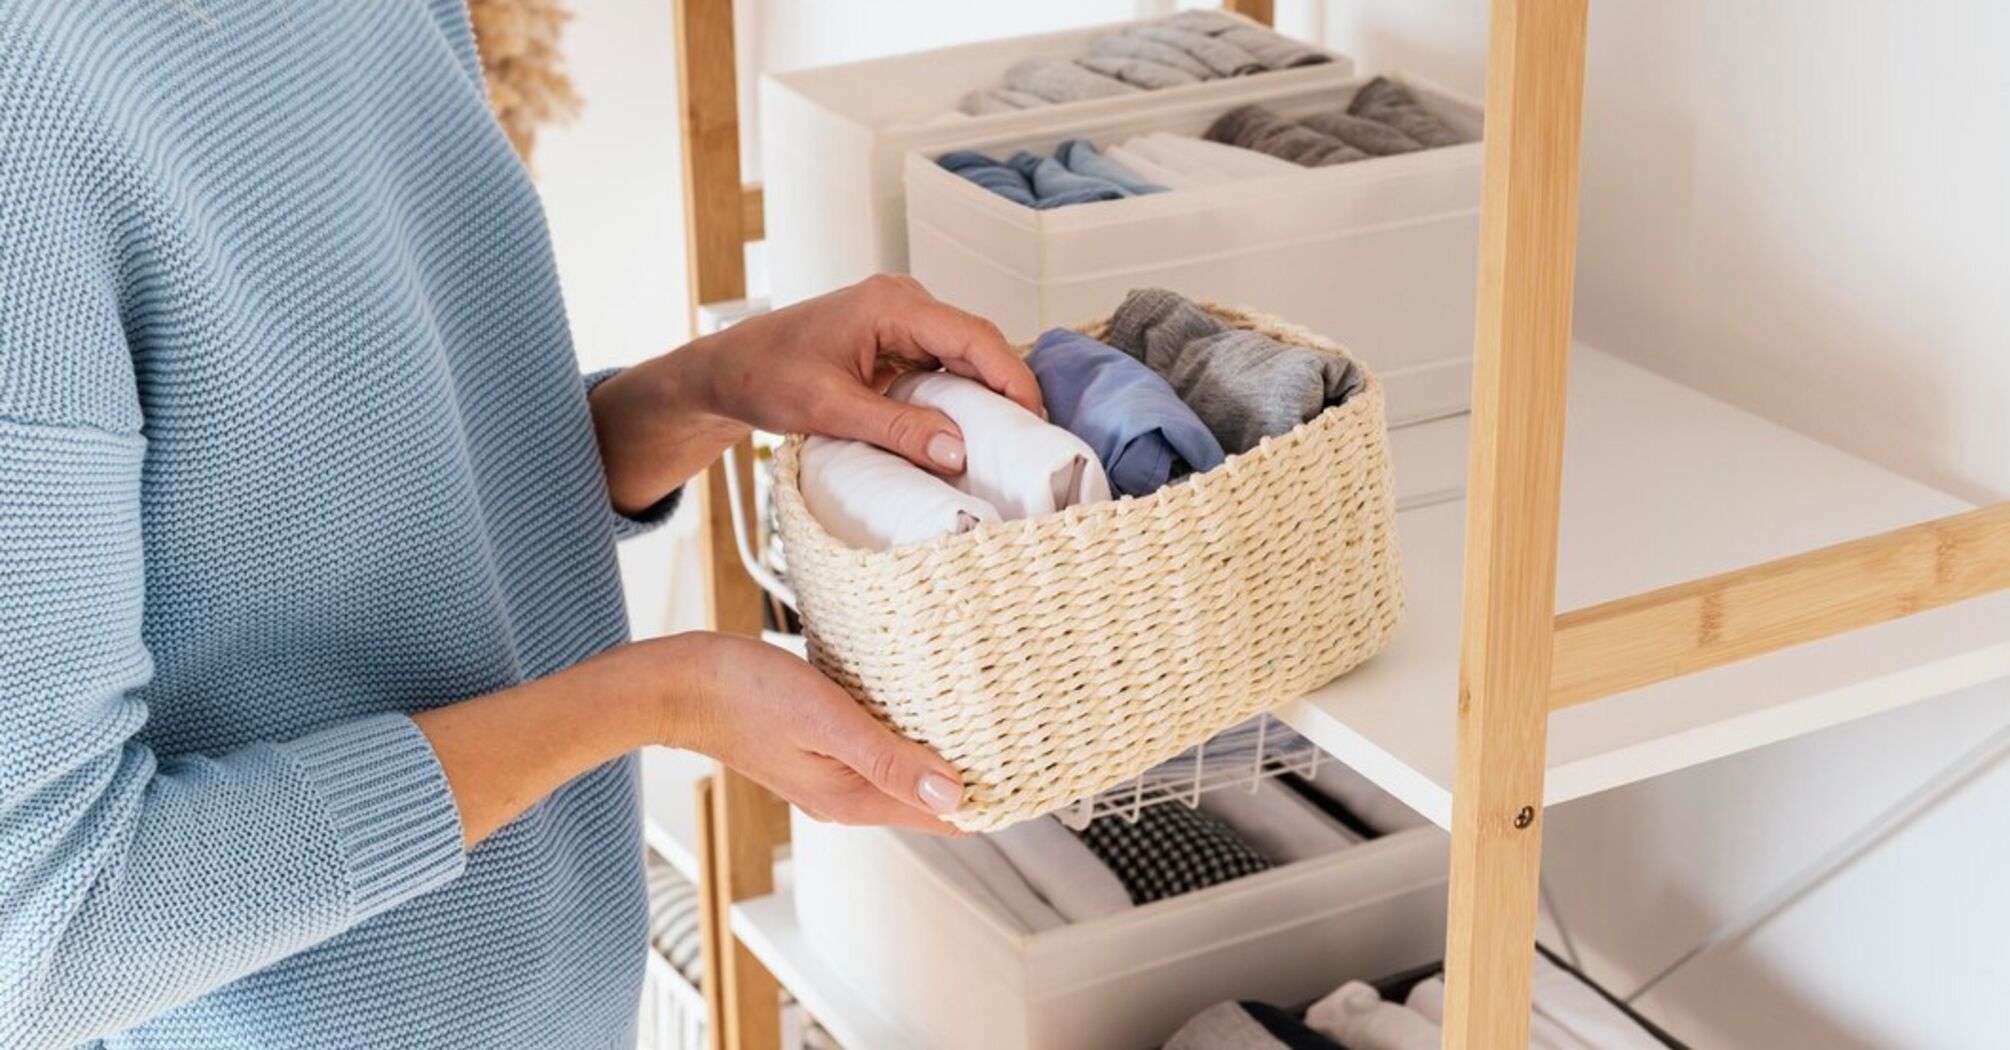 How to store things compactly in a small apartment: 5 tips for organizing space